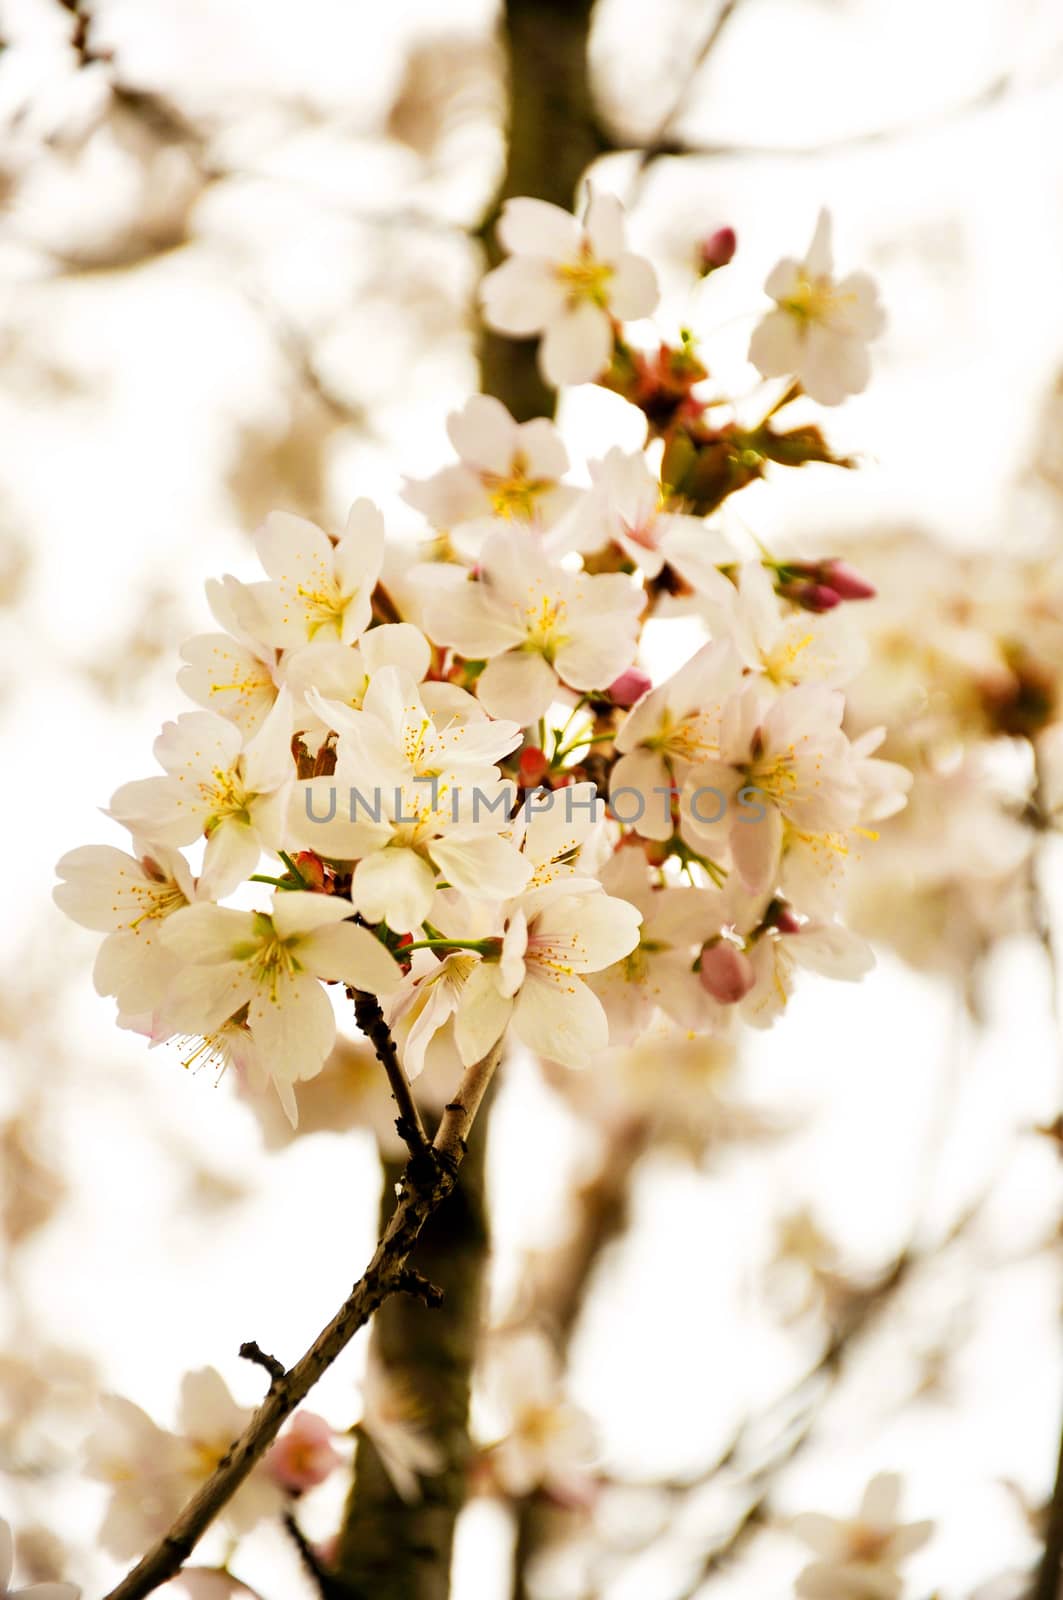 Paradise blooming white apple flowers in spring.